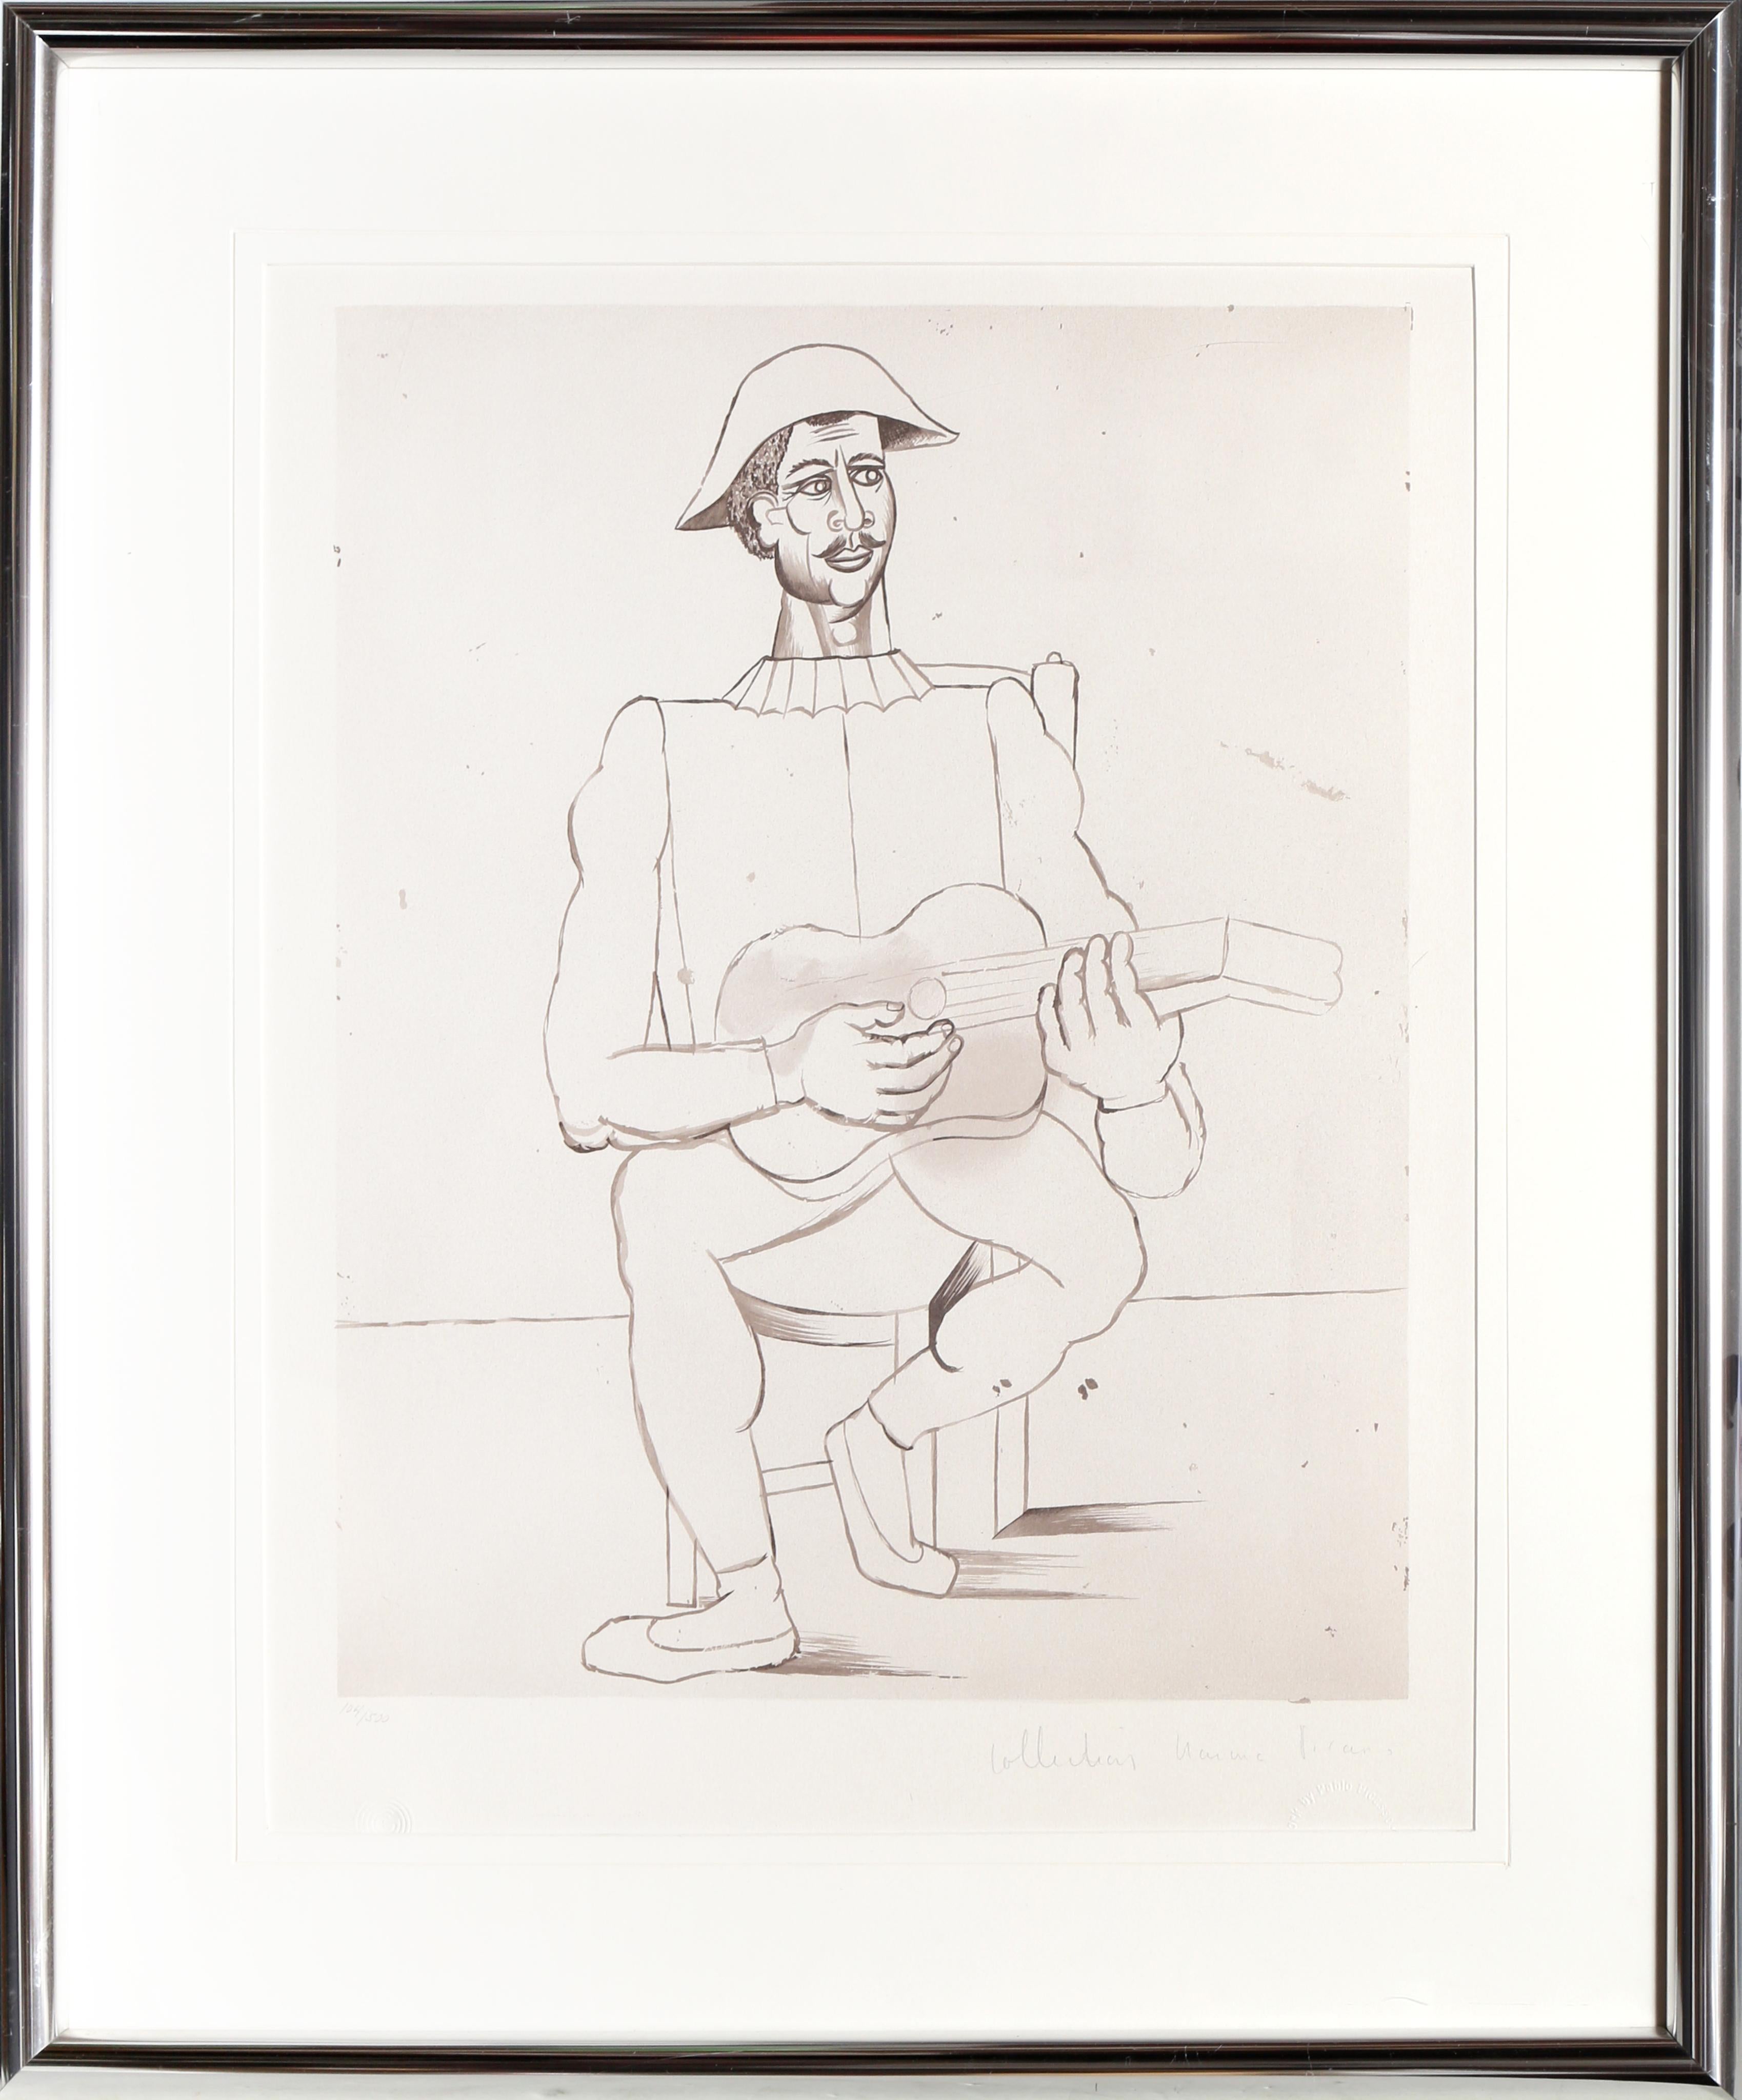 Pablo Picasso's rendering of a harlequin playing the guitar may be a common theme throughout his prints, but this work is unique for his careful linework and delicate shading along the face and neck, guitar, and chair in the scene. 

Arlequin